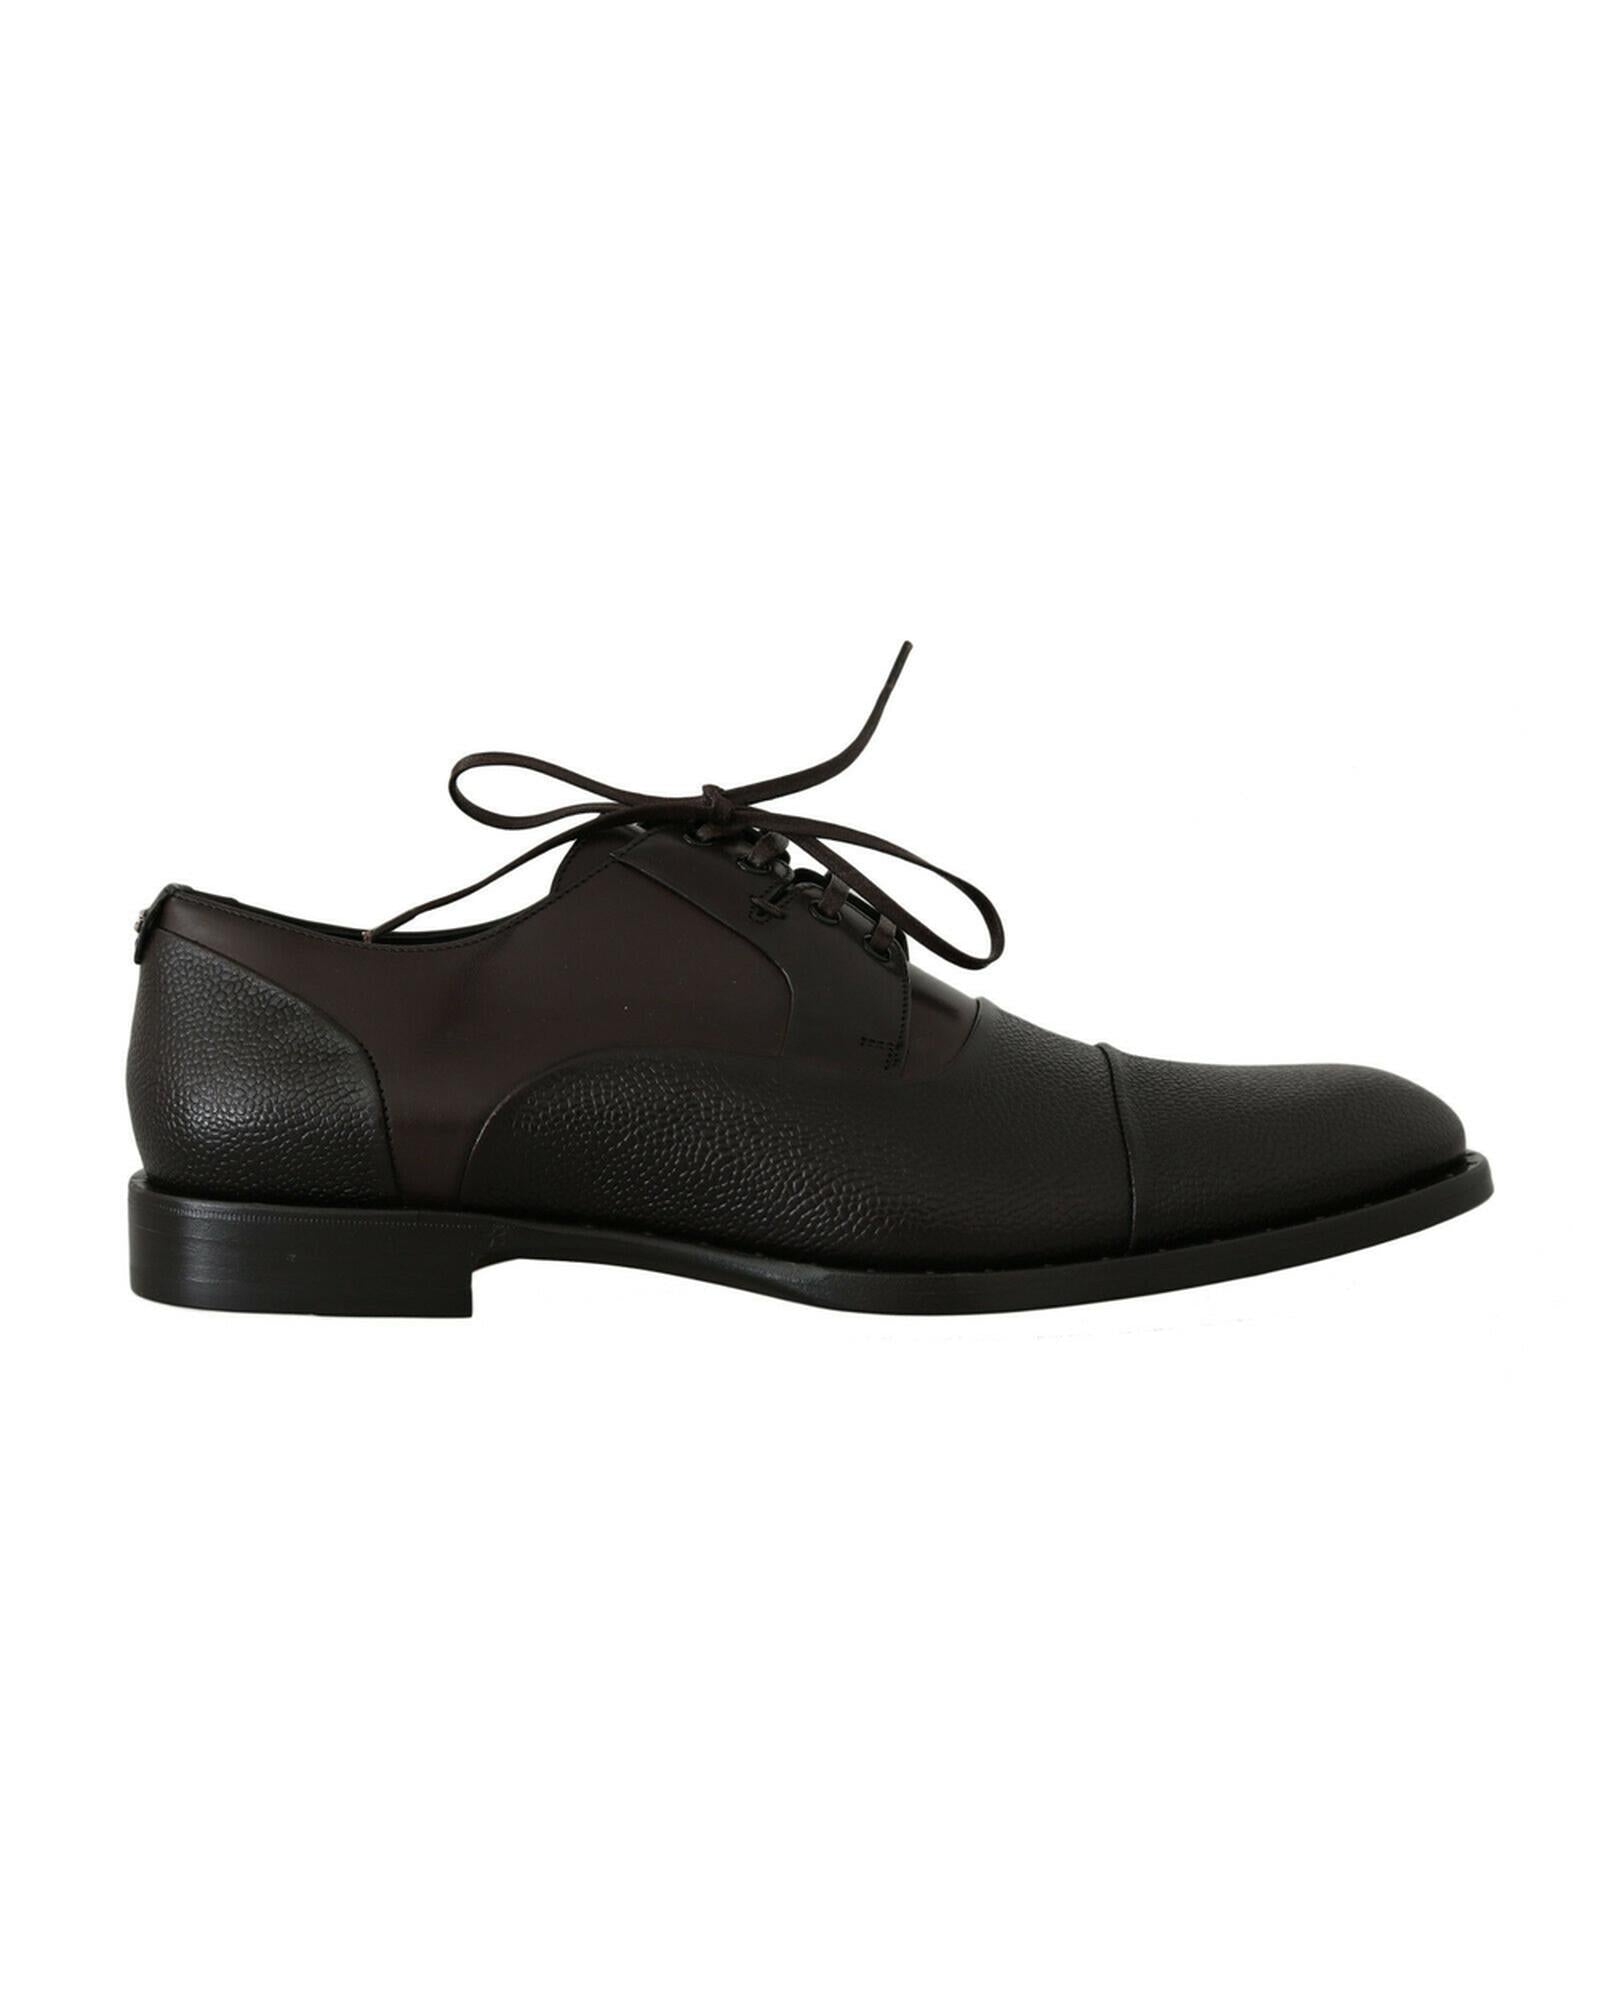 Brown Leather Laceup Dress Shoes by Dolce &amp; Gabbana 40 EU Men